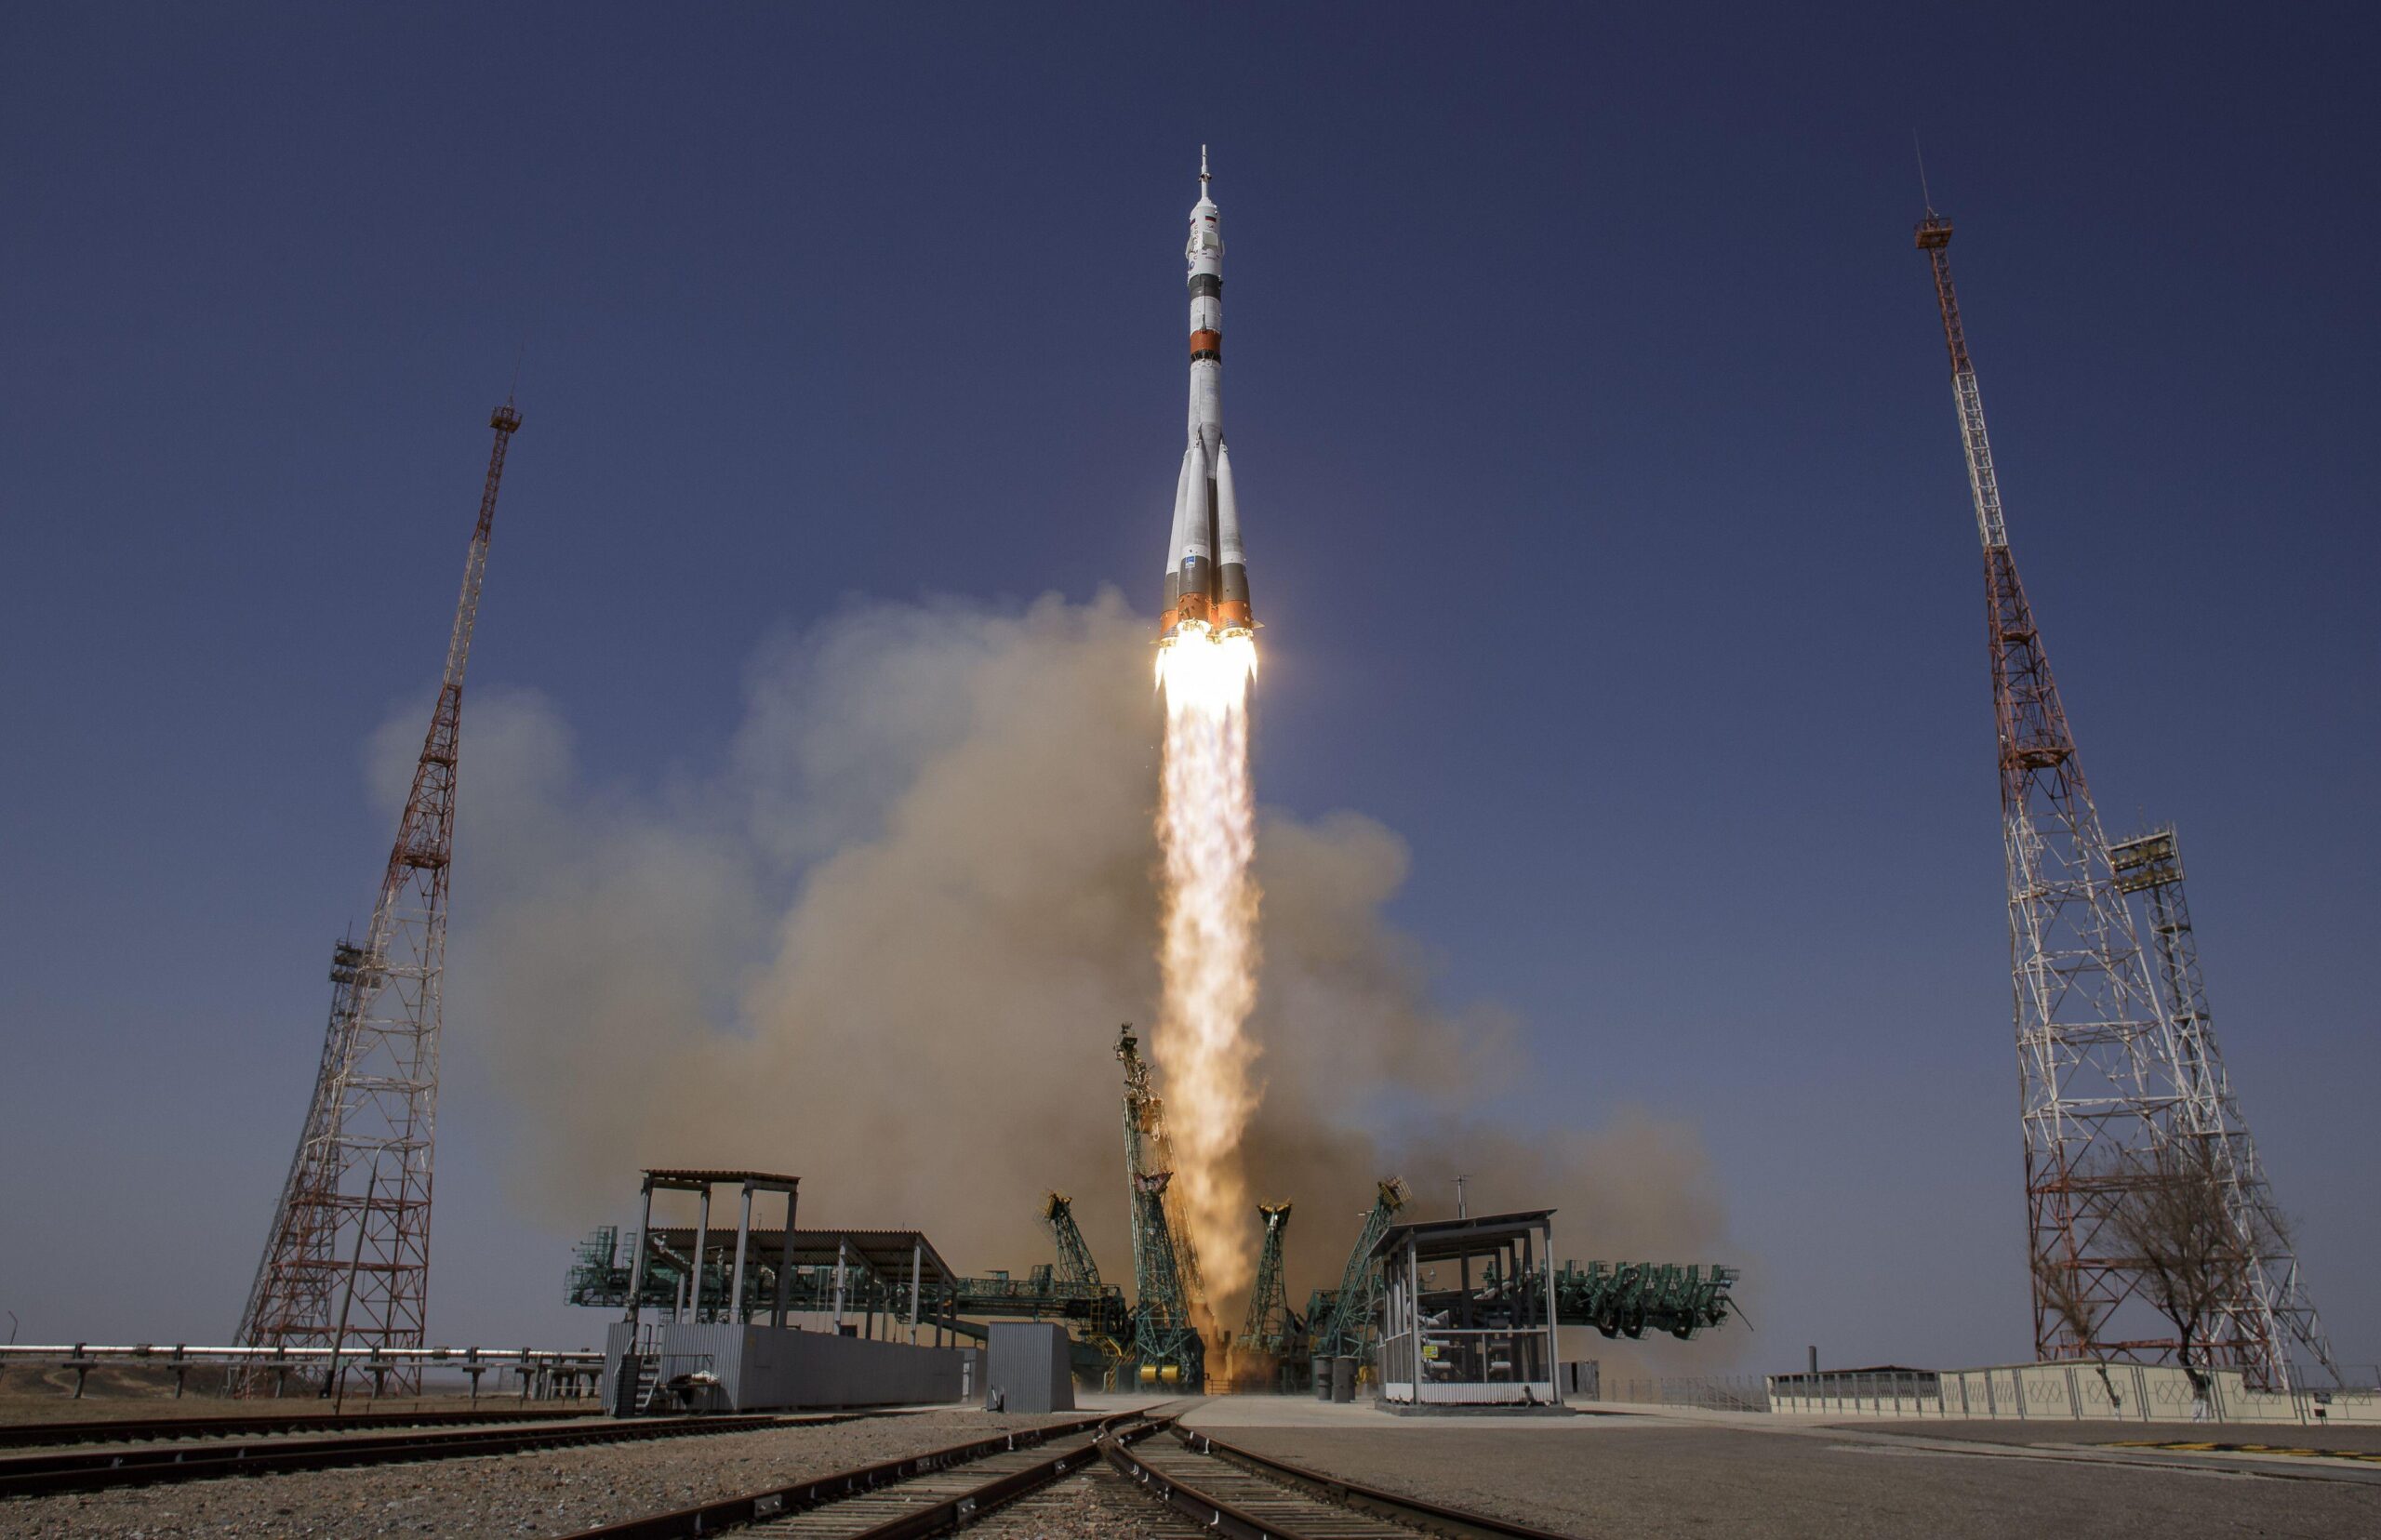 The Soyuz MS-18 rocket is launched with Expedition 65 NASA astronaut Mark Vande Hei with Roscosmos cosmonauts Pyotr Dubrov and Oleg Novitskiy, Friday, April 9, 2021, at the Baikonur Cosmodrome in Kazakhstan. NASA Photo by Bill Ingalls/UPI Credit: UPI/Alamy Live News